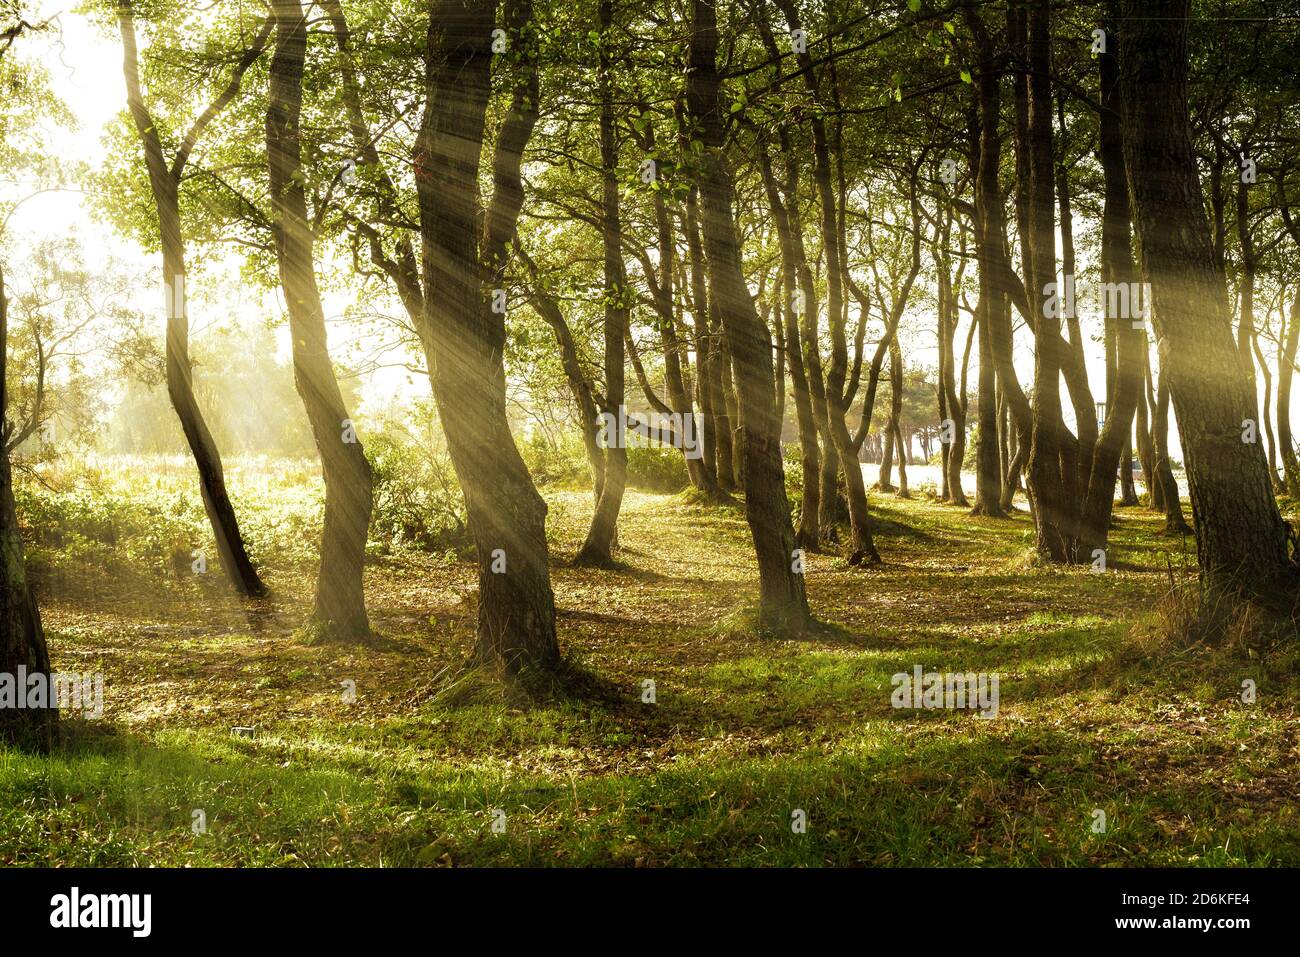 Sunbeams fall through the leaves of tall trees in a beautiful forest at noon. Stock Photo